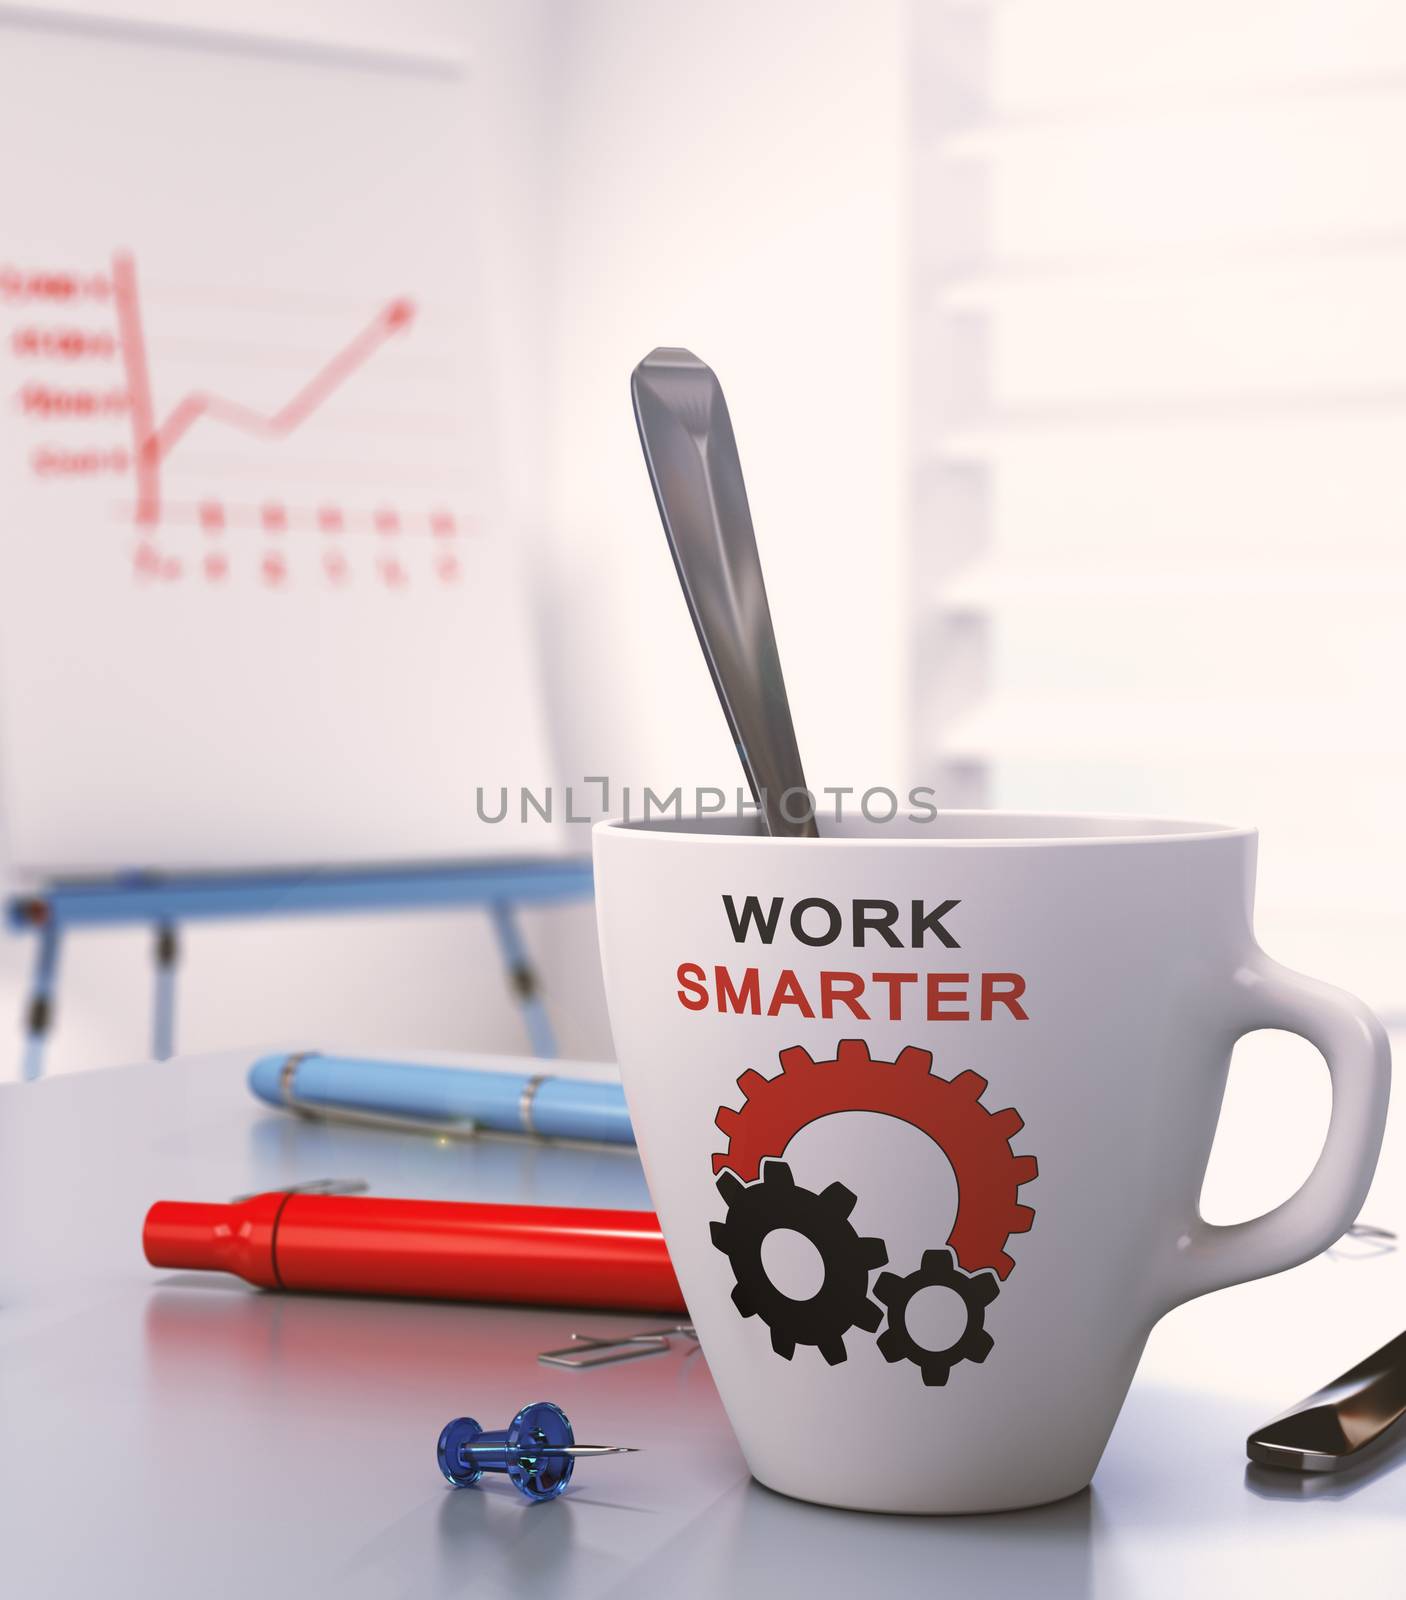 Workplace with flipchart and a mug where it is written work smarter, 3D illustration.